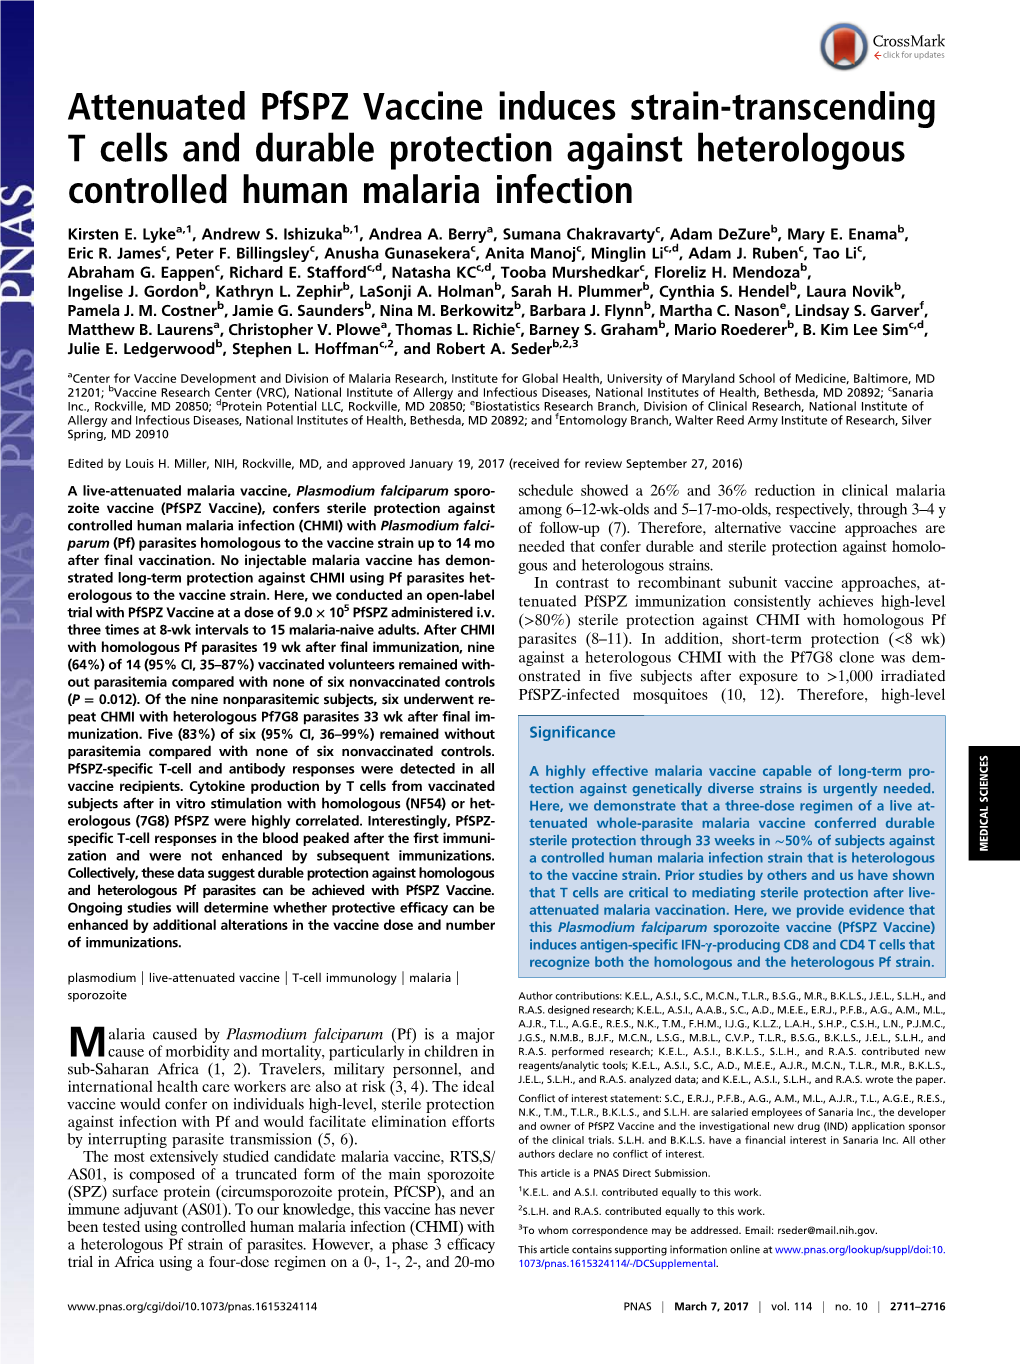 Attenuated Pfspz Vaccine Induces Strain-Transcending T Cells and Durable Protection Against Heterologous Controlled Human Malaria Infection